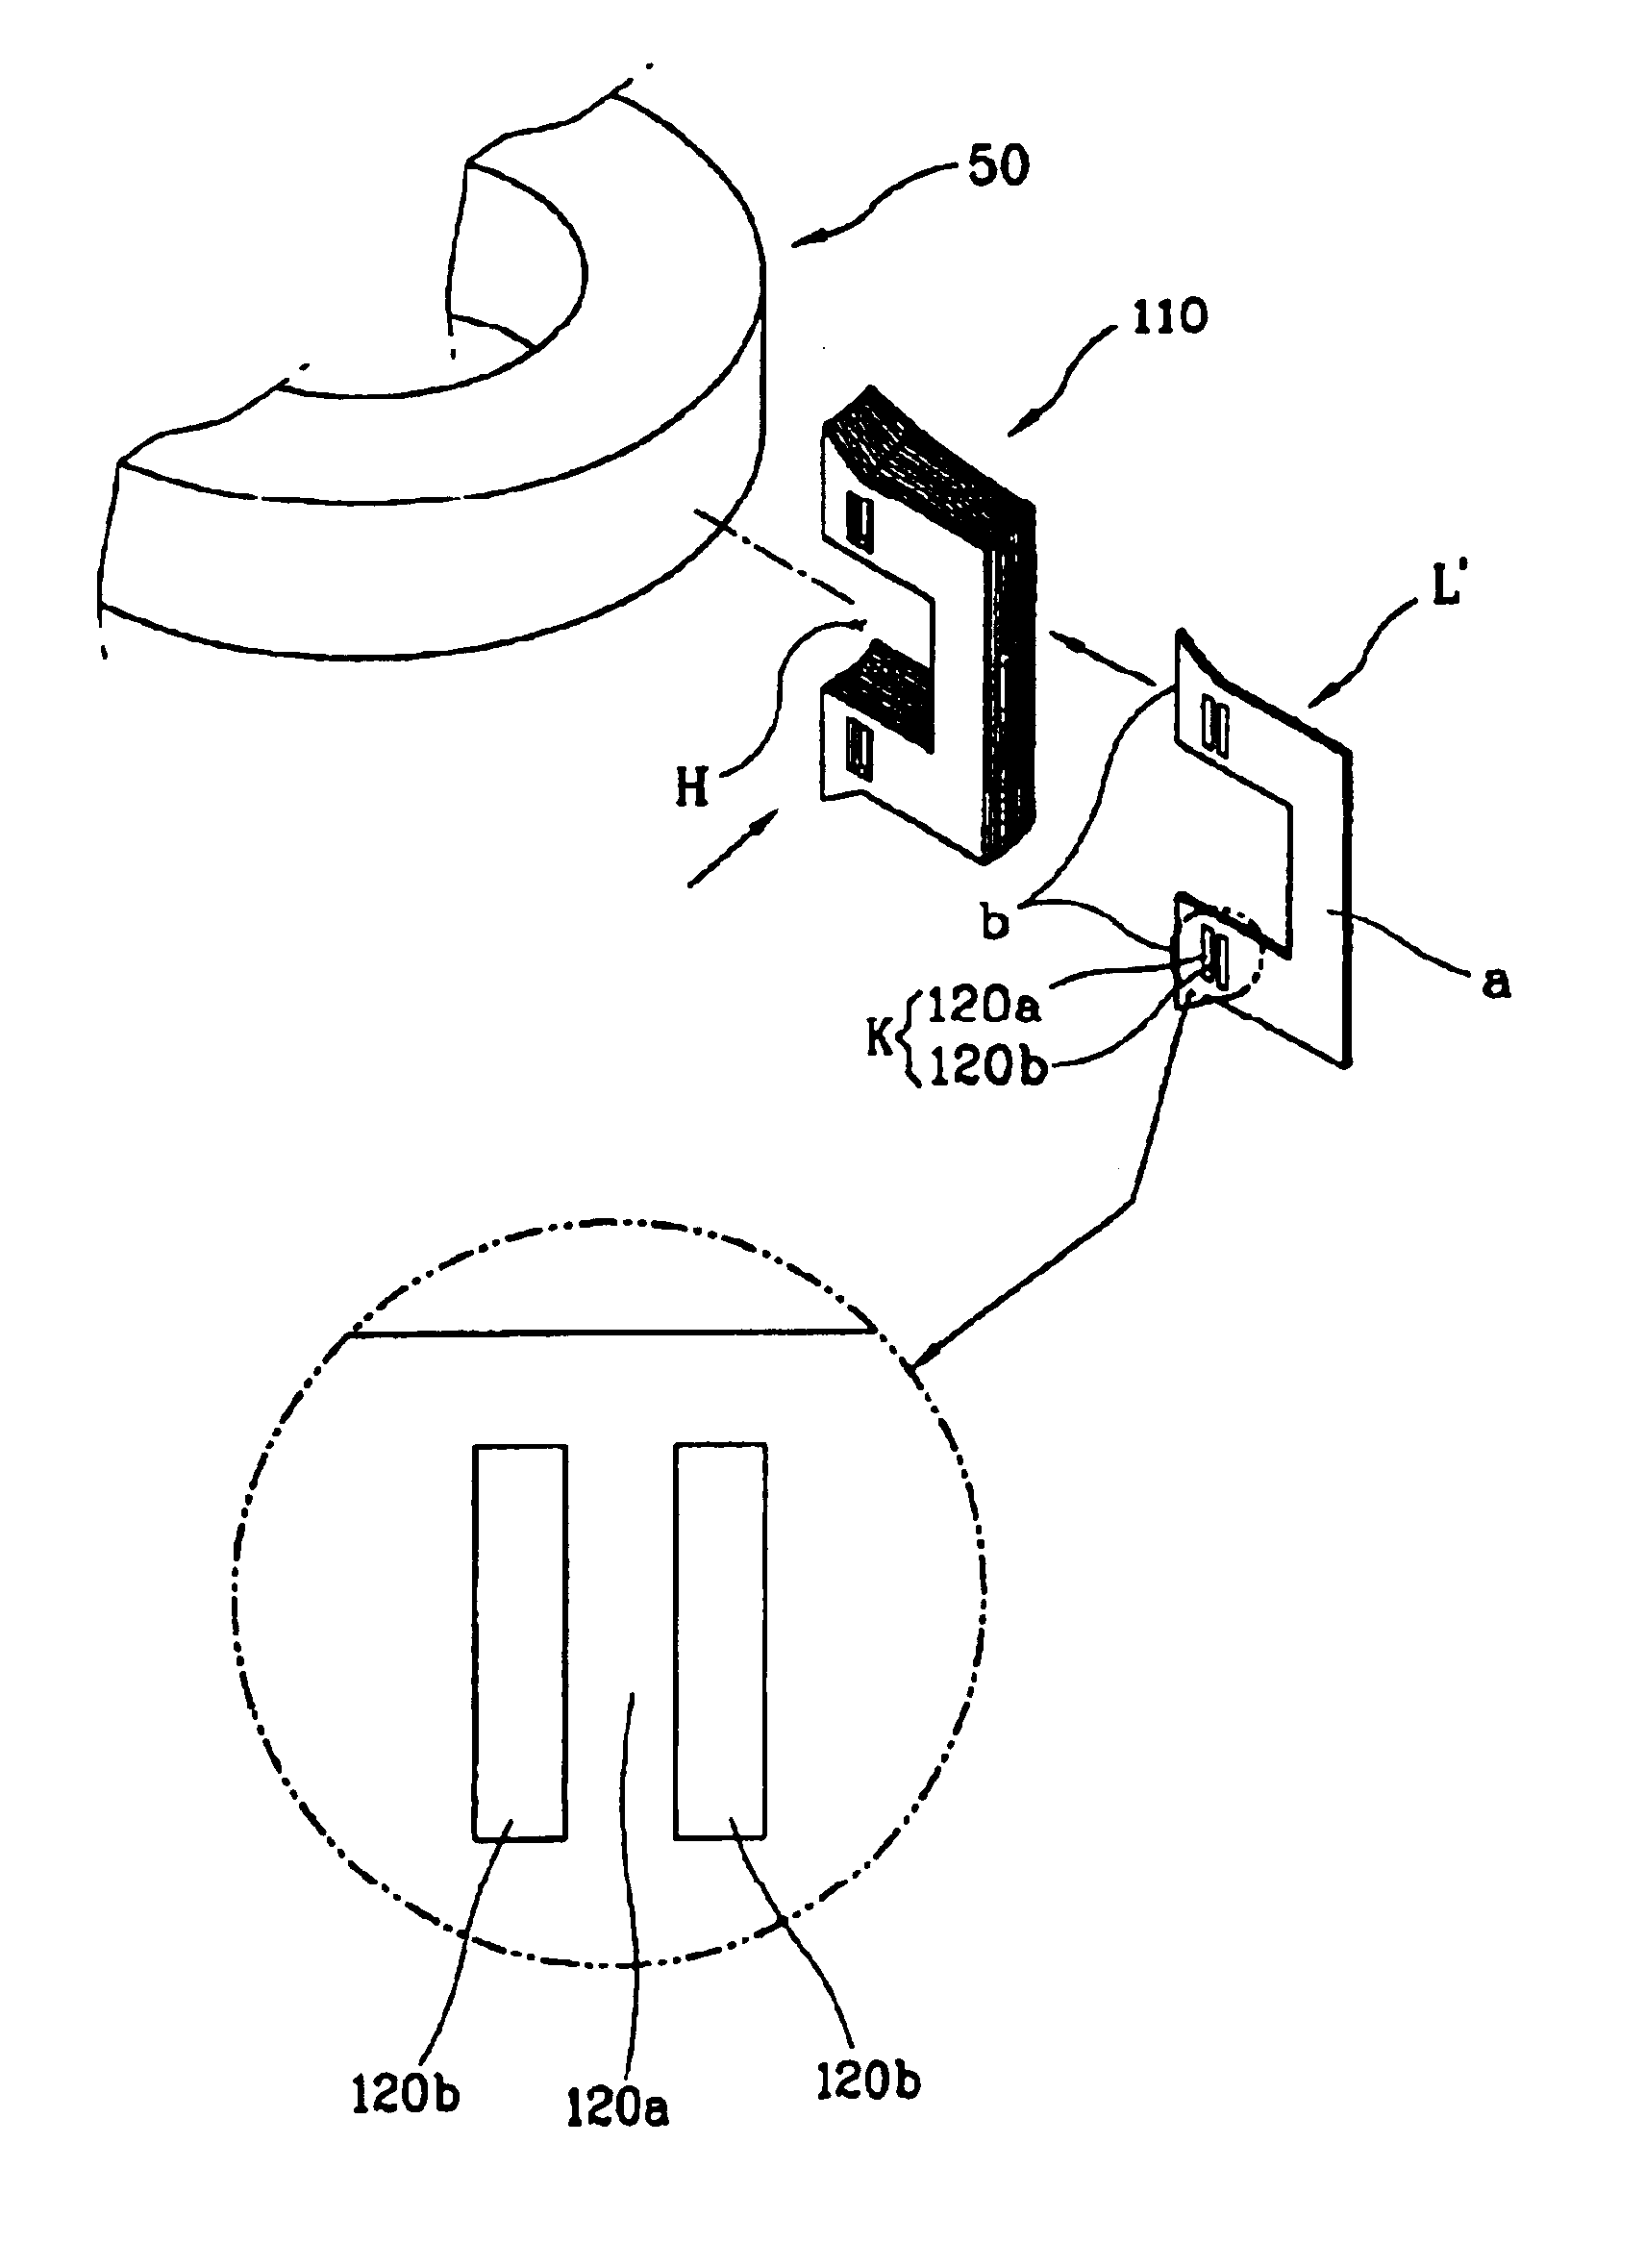 Lamination sheet and core lamination structure of a motor